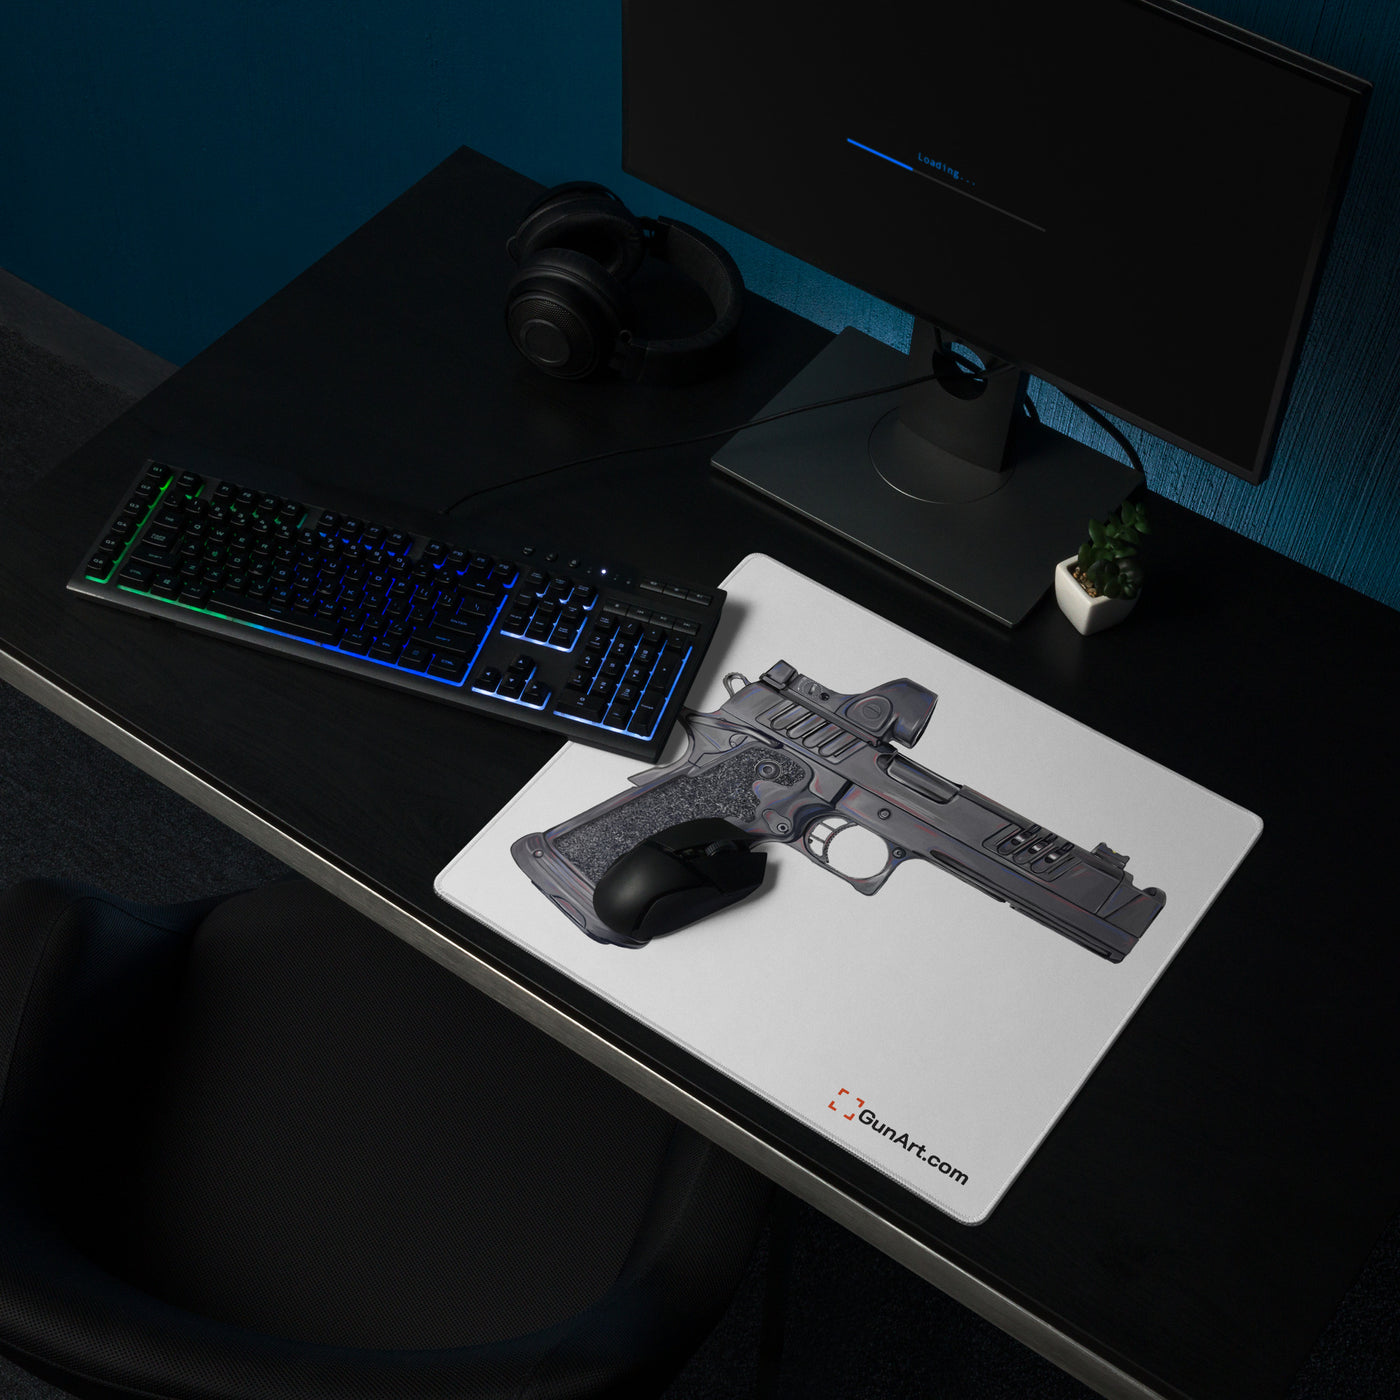 2011 Delta Pistol Gaming Mouse Pad - Just The Piece - White Background